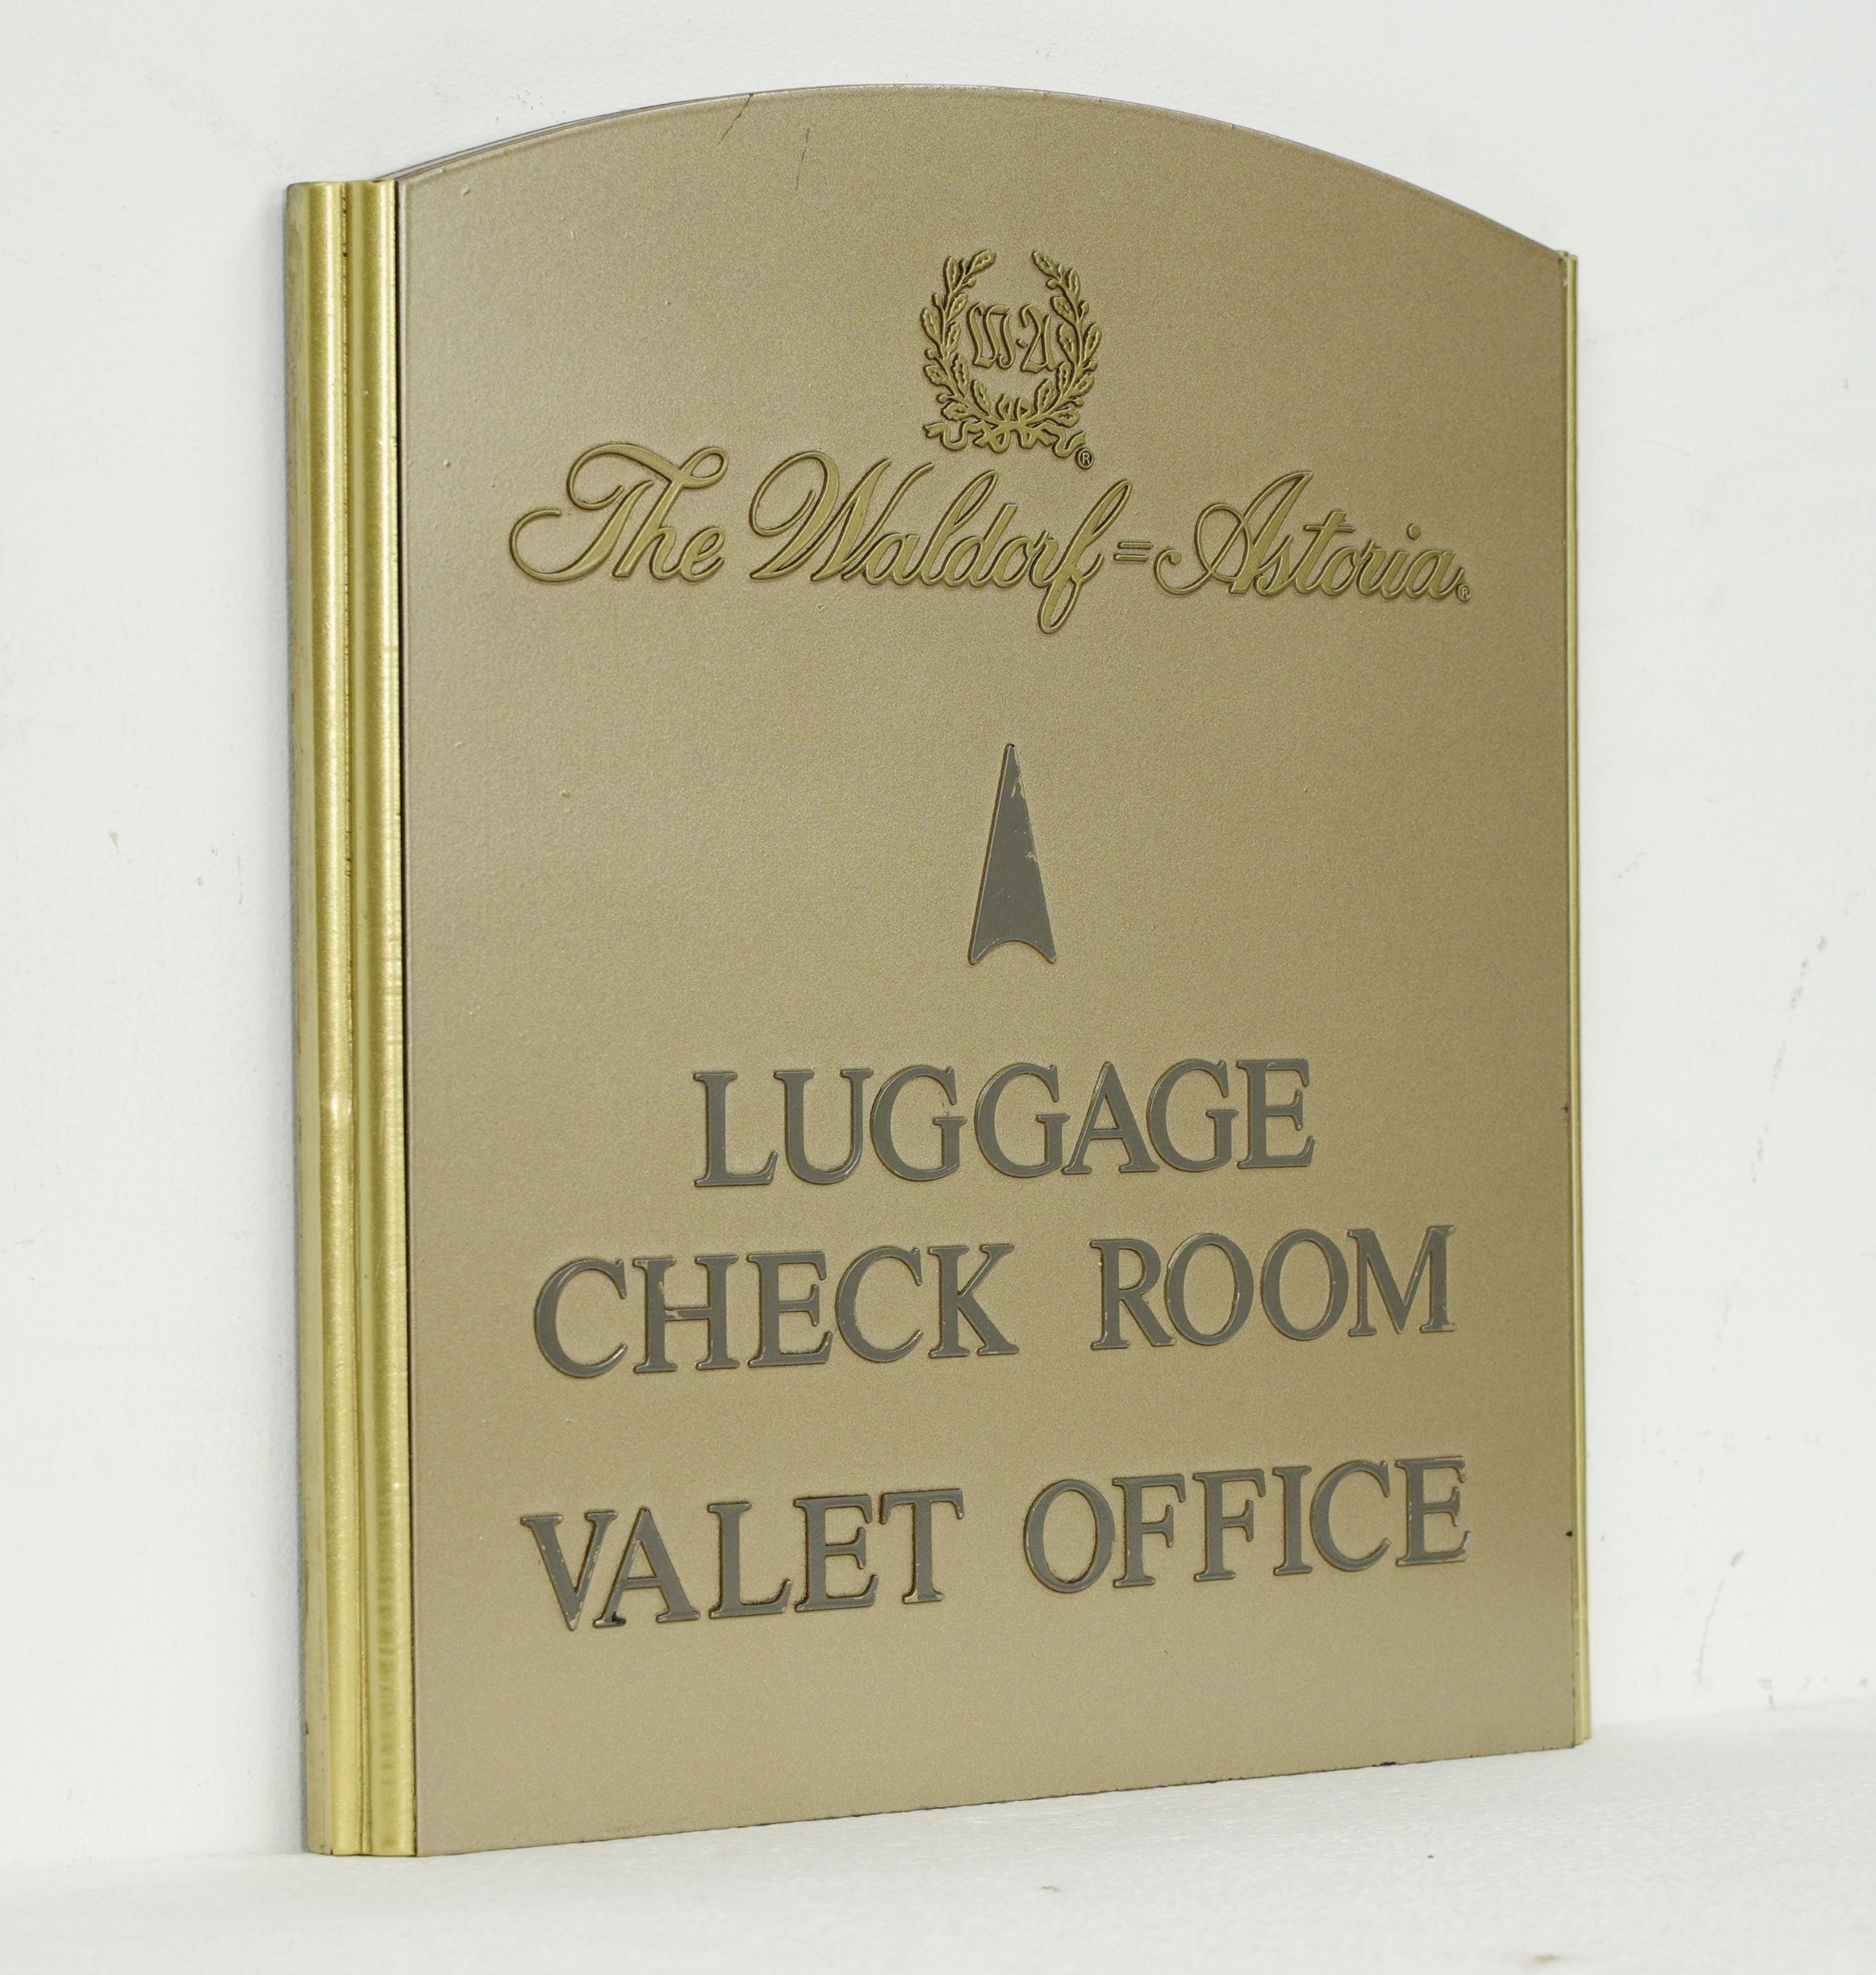 20th Century sign was sourced from the iconic Waldorf Astoria in New York City. Crafted with a painted plexiglass surface and a brass border, it signifies the Luggage Check Room and Valet Office. Elevate your décor with a genuine piece of history